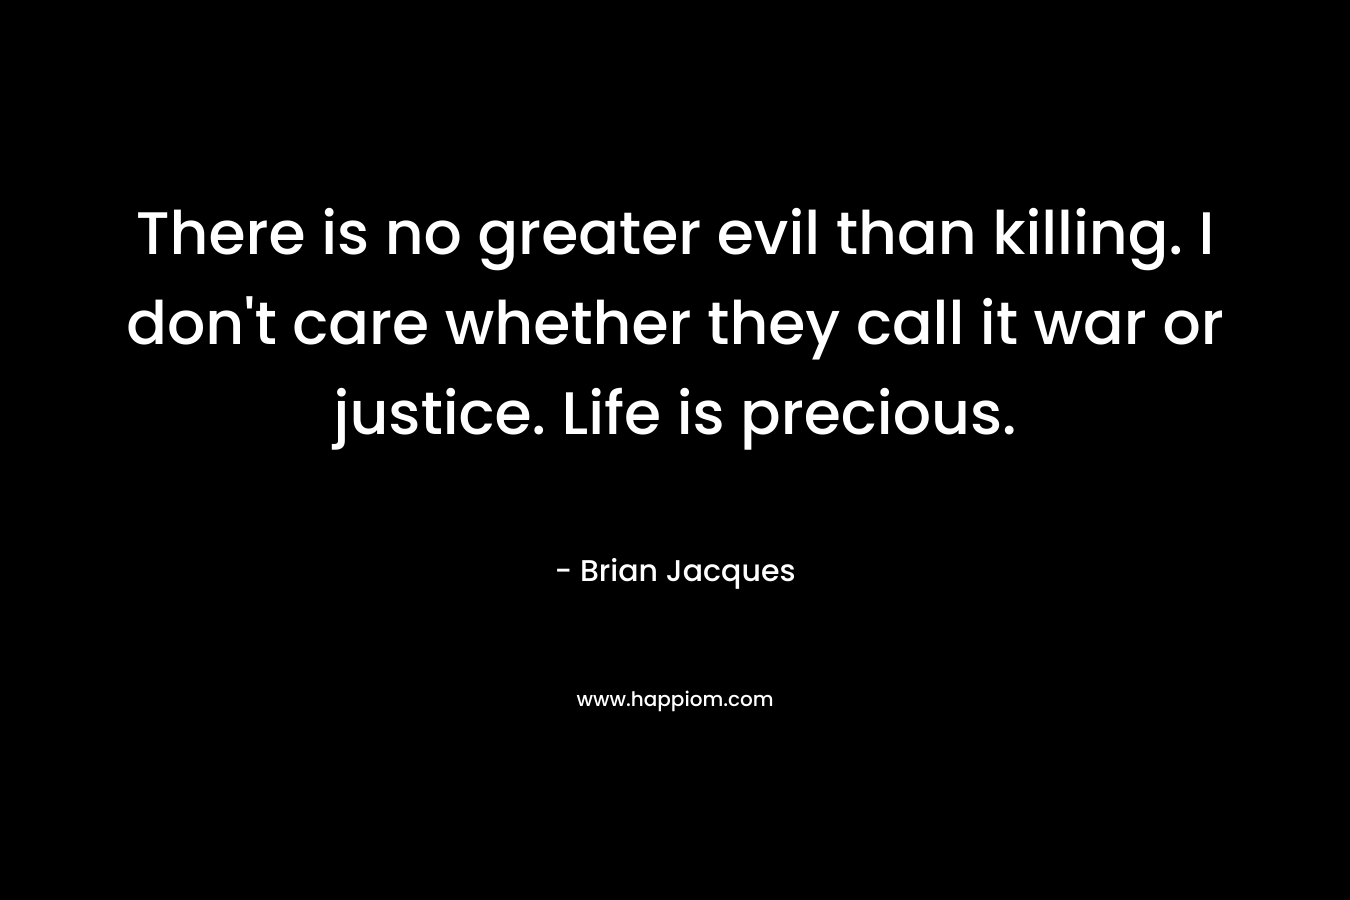 There is no greater evil than killing. I don't care whether they call it war or justice. Life is precious.